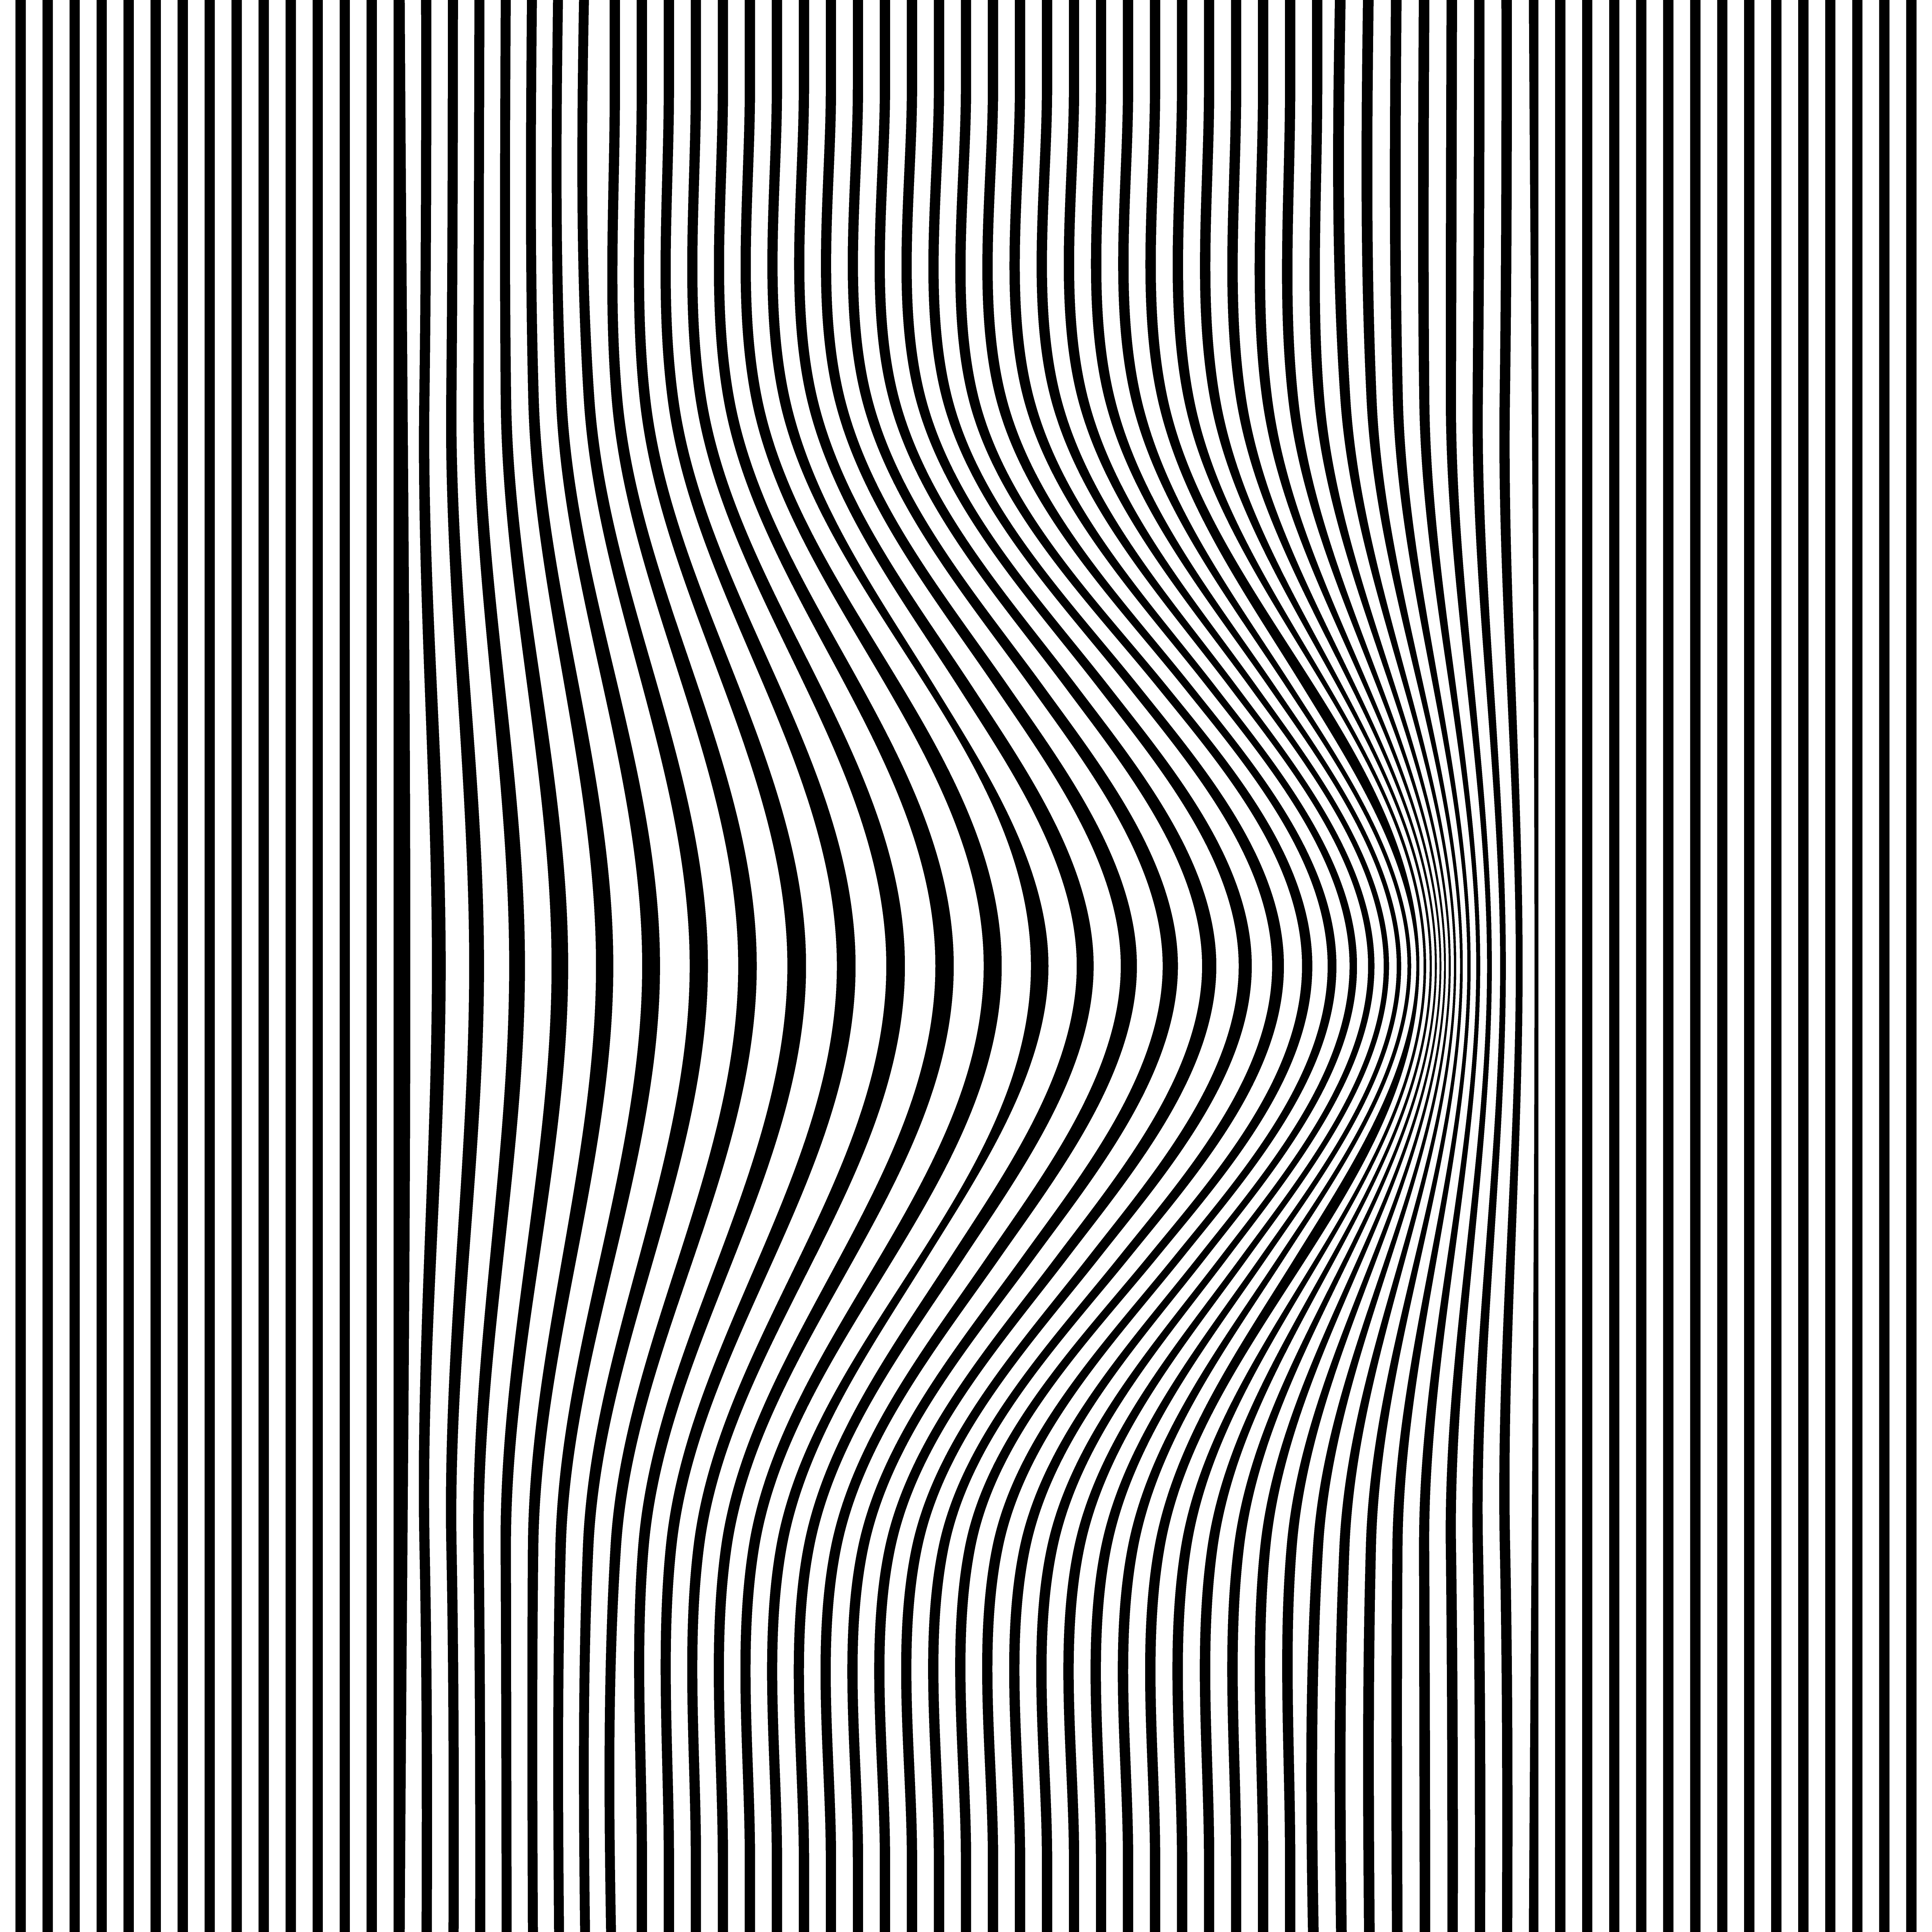 Abstract striped lines pattern wave convex design black and white